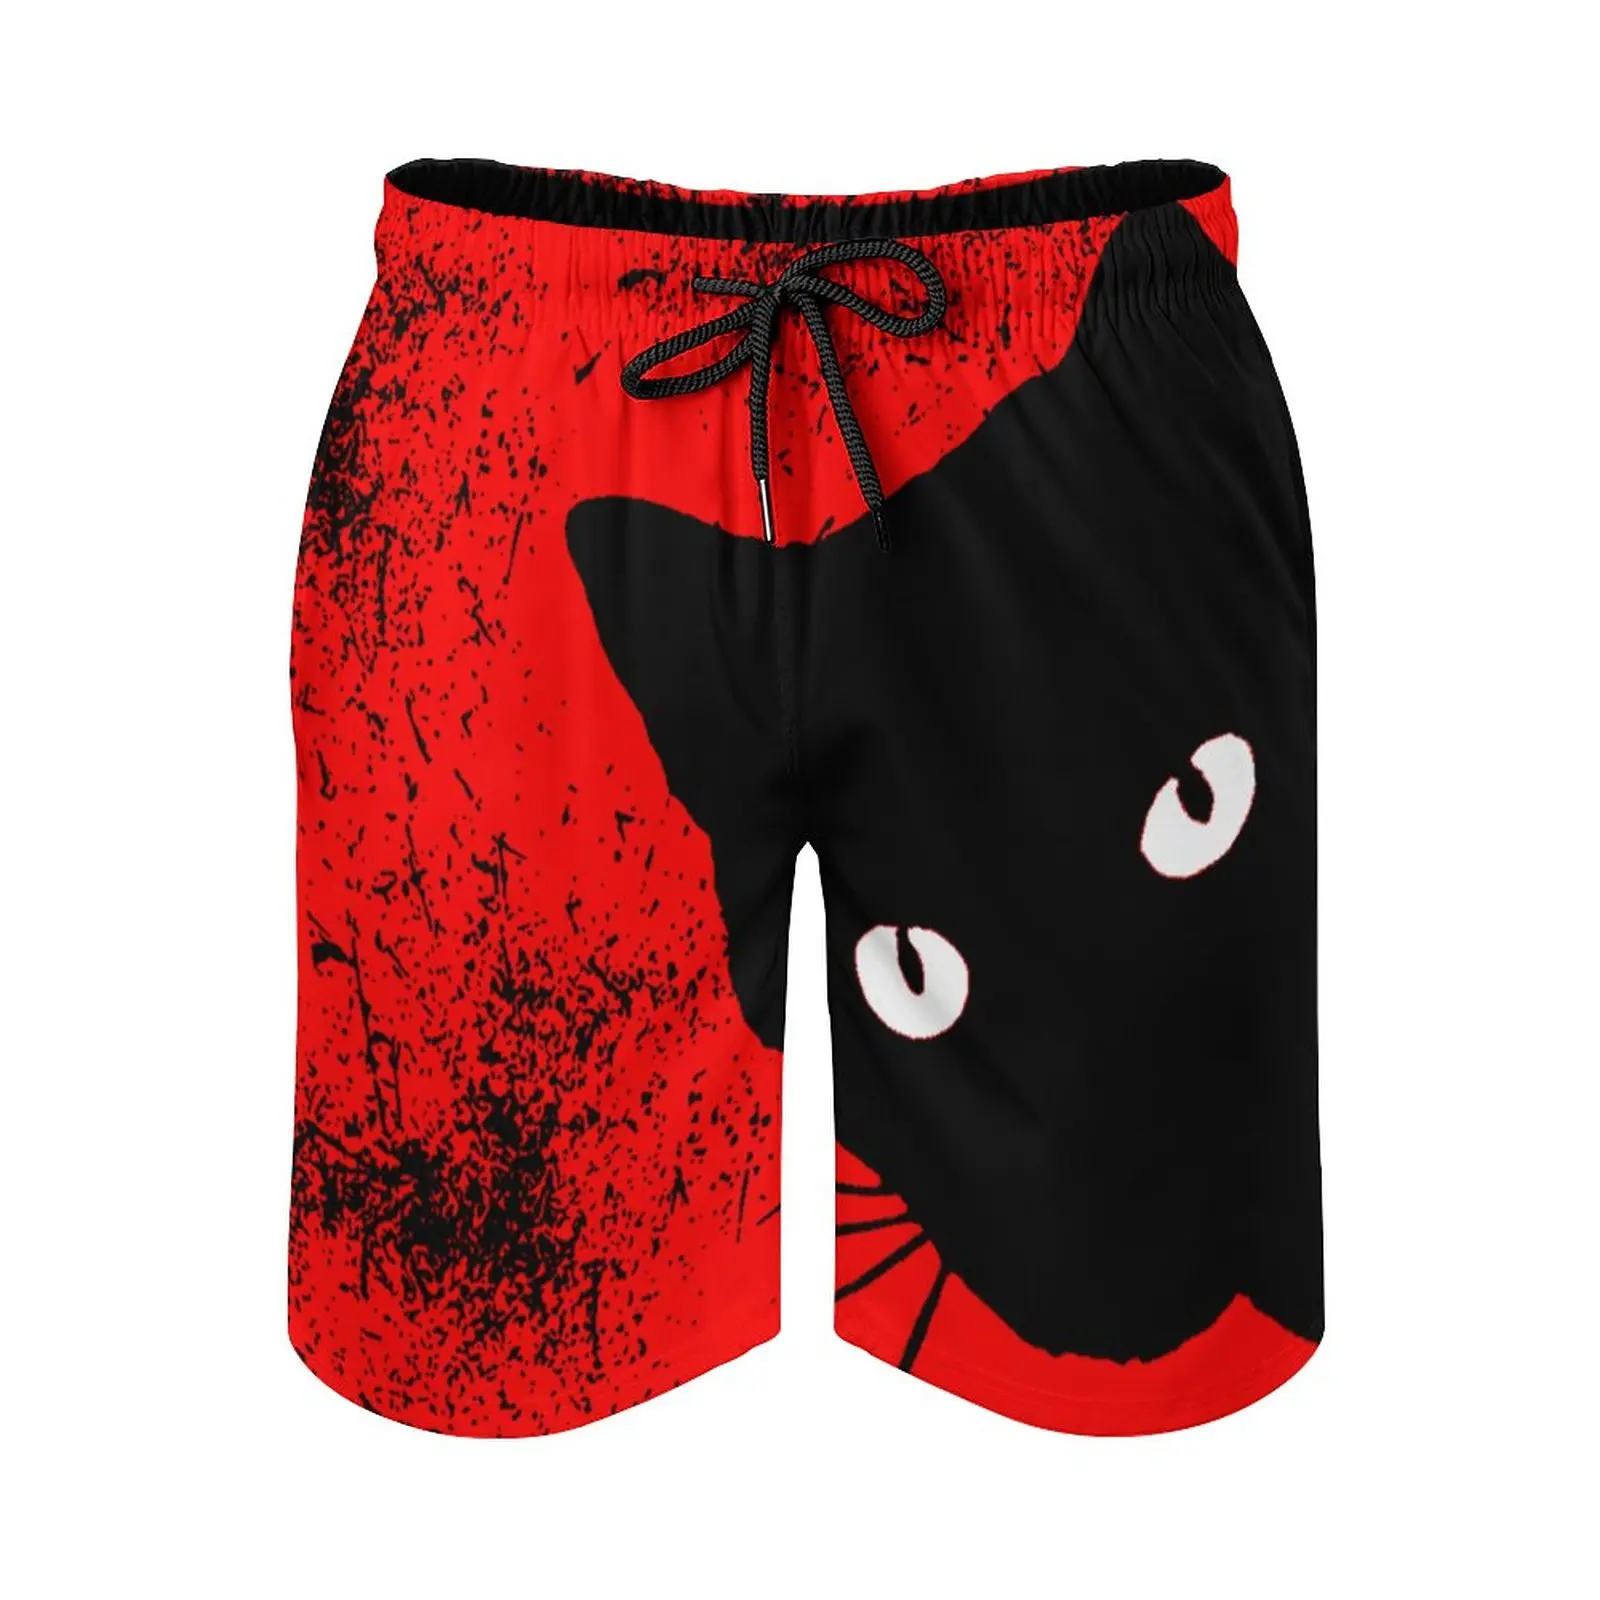 

Anime Men's Beach Shorts Foals Black Cat Foals Band Loose Stretch Causal Novelty Male Shorts Sports Adjustable Drawcord Breathab